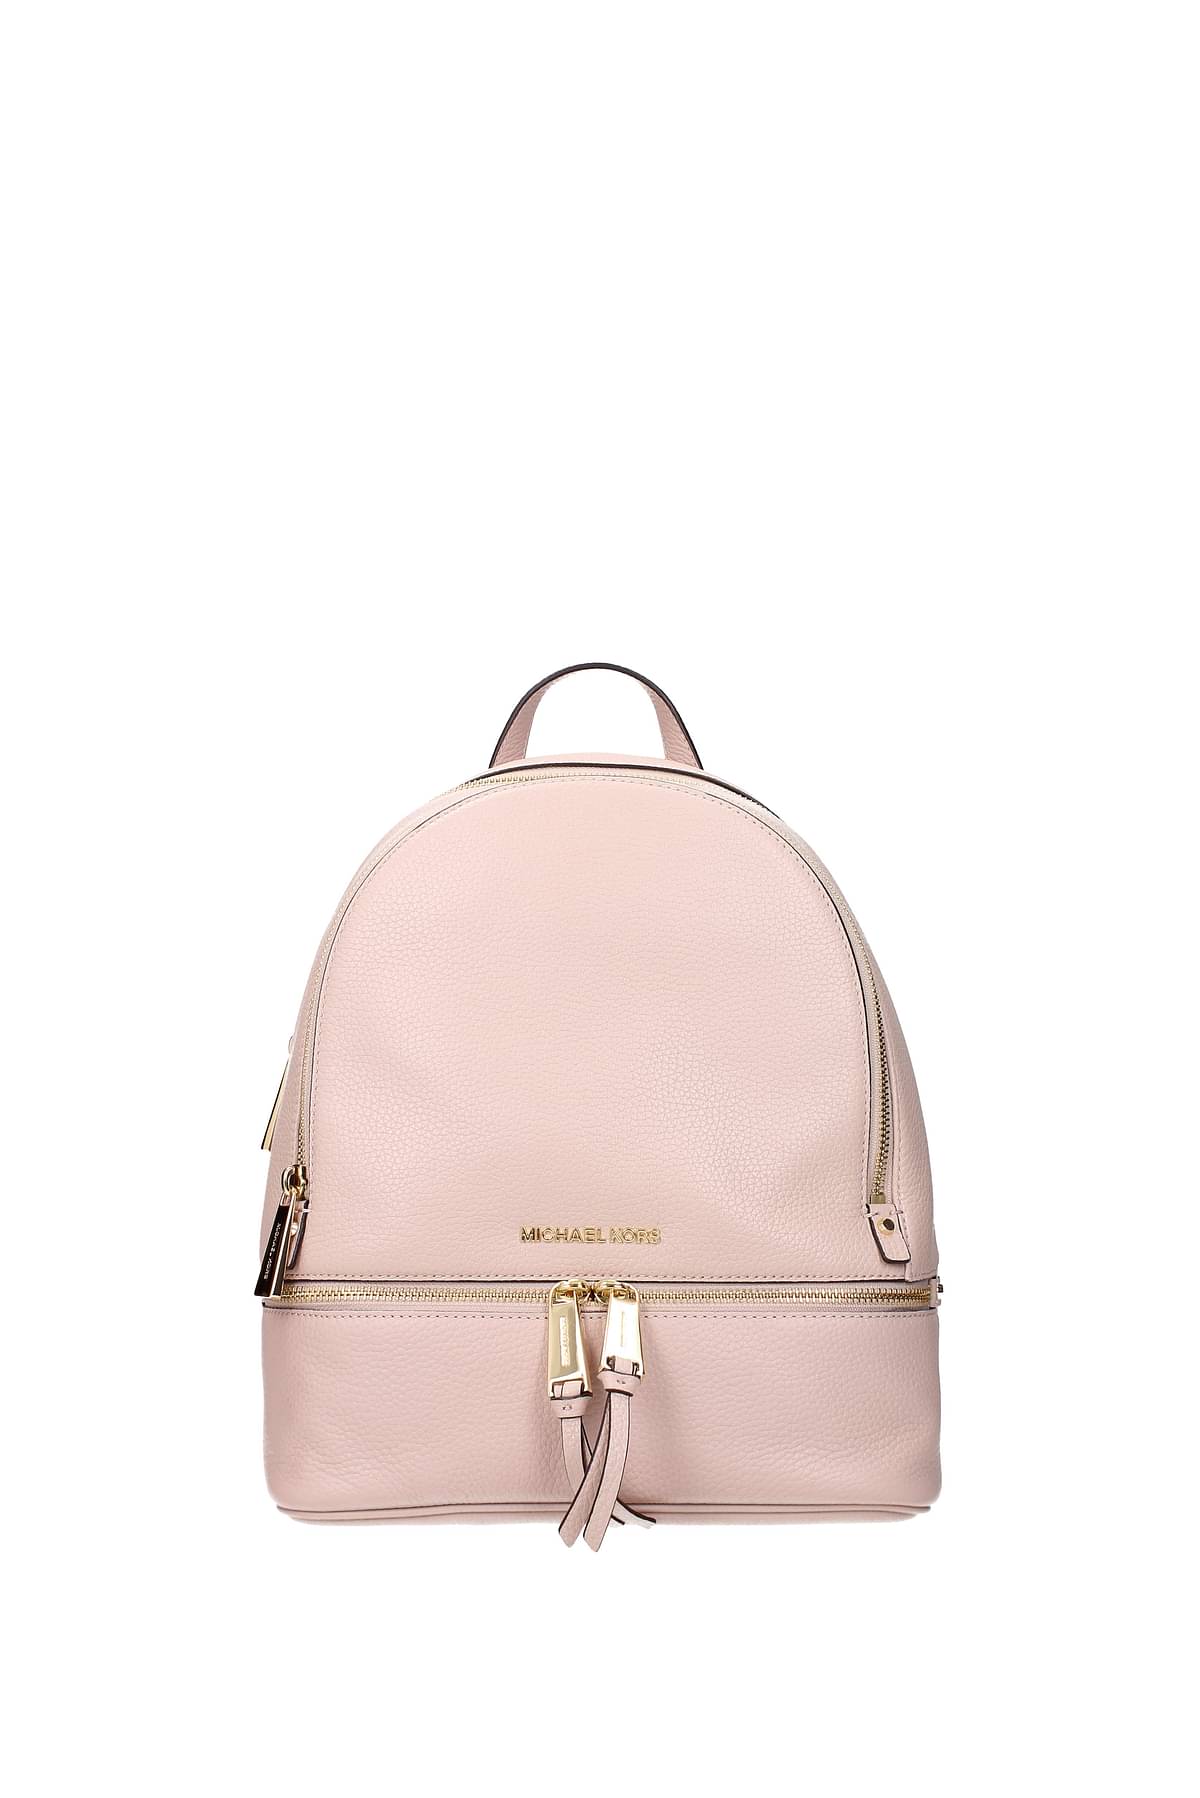 Michael Kors Backpacks and bumbags rhea zip md Women 30S5GEZB1LSOFTPINK  Leather Pink Soft Pink 260€